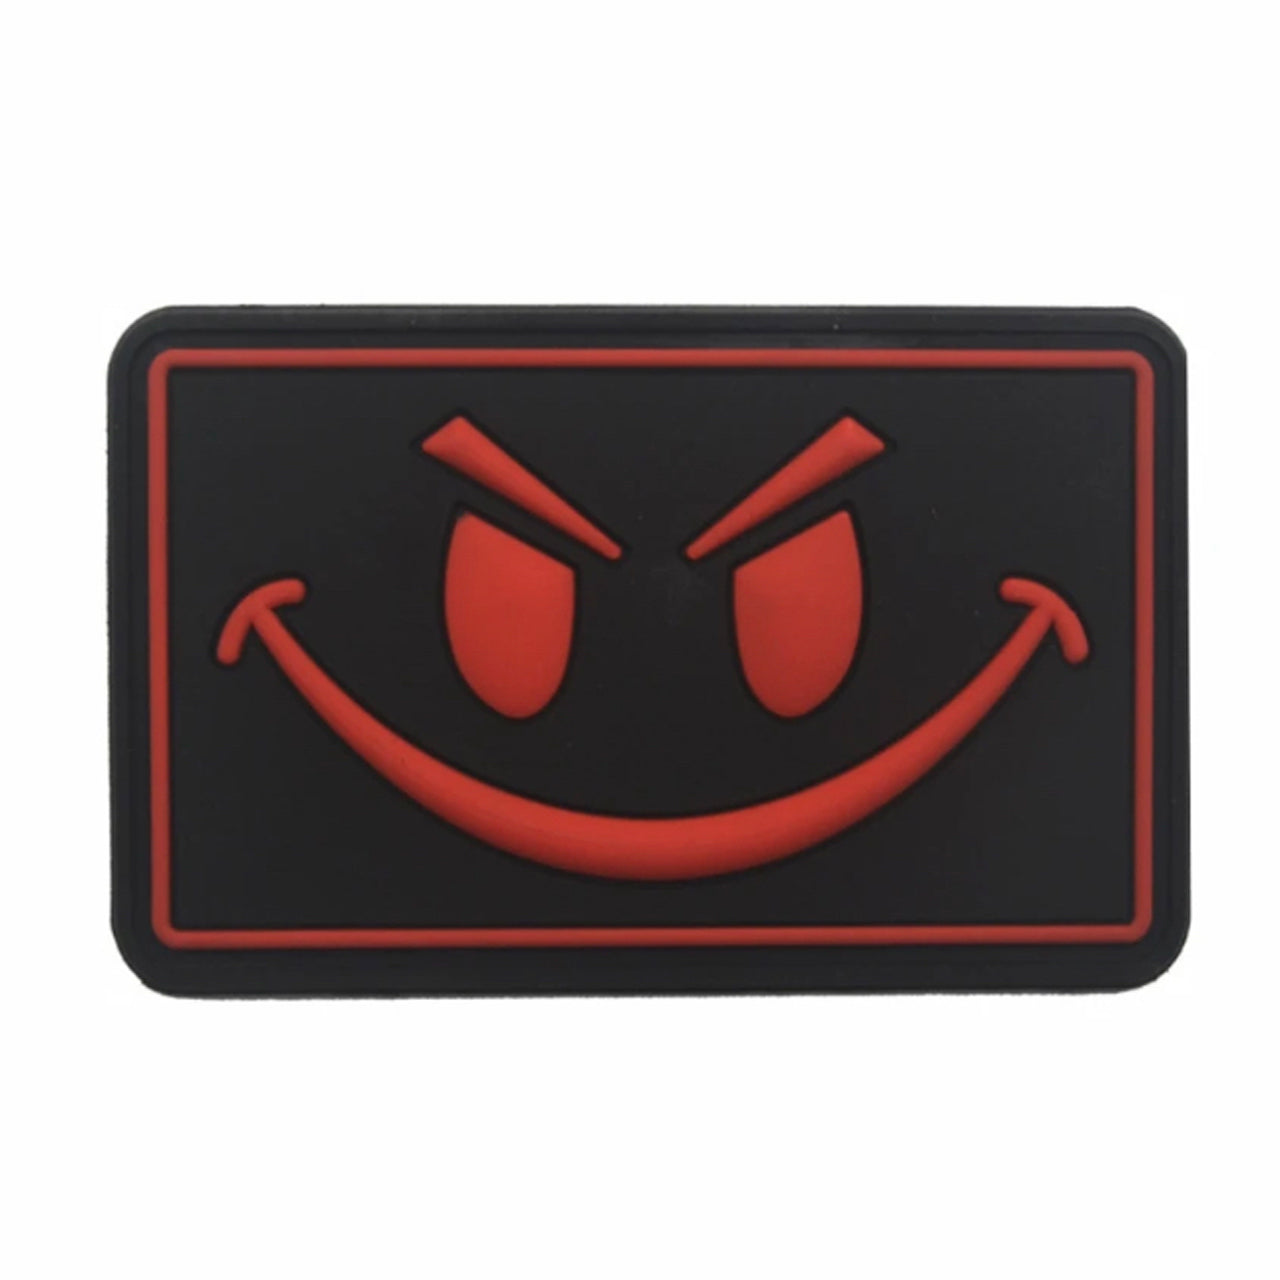 Big Evil Smiley PVC Patch Large, Velcro backed Badge. Great for attaching to your field gear, jackets, shirts, pants, jeans, hats or even create your own patch board. Size: 8x5cm www.defenceqstore.com.au